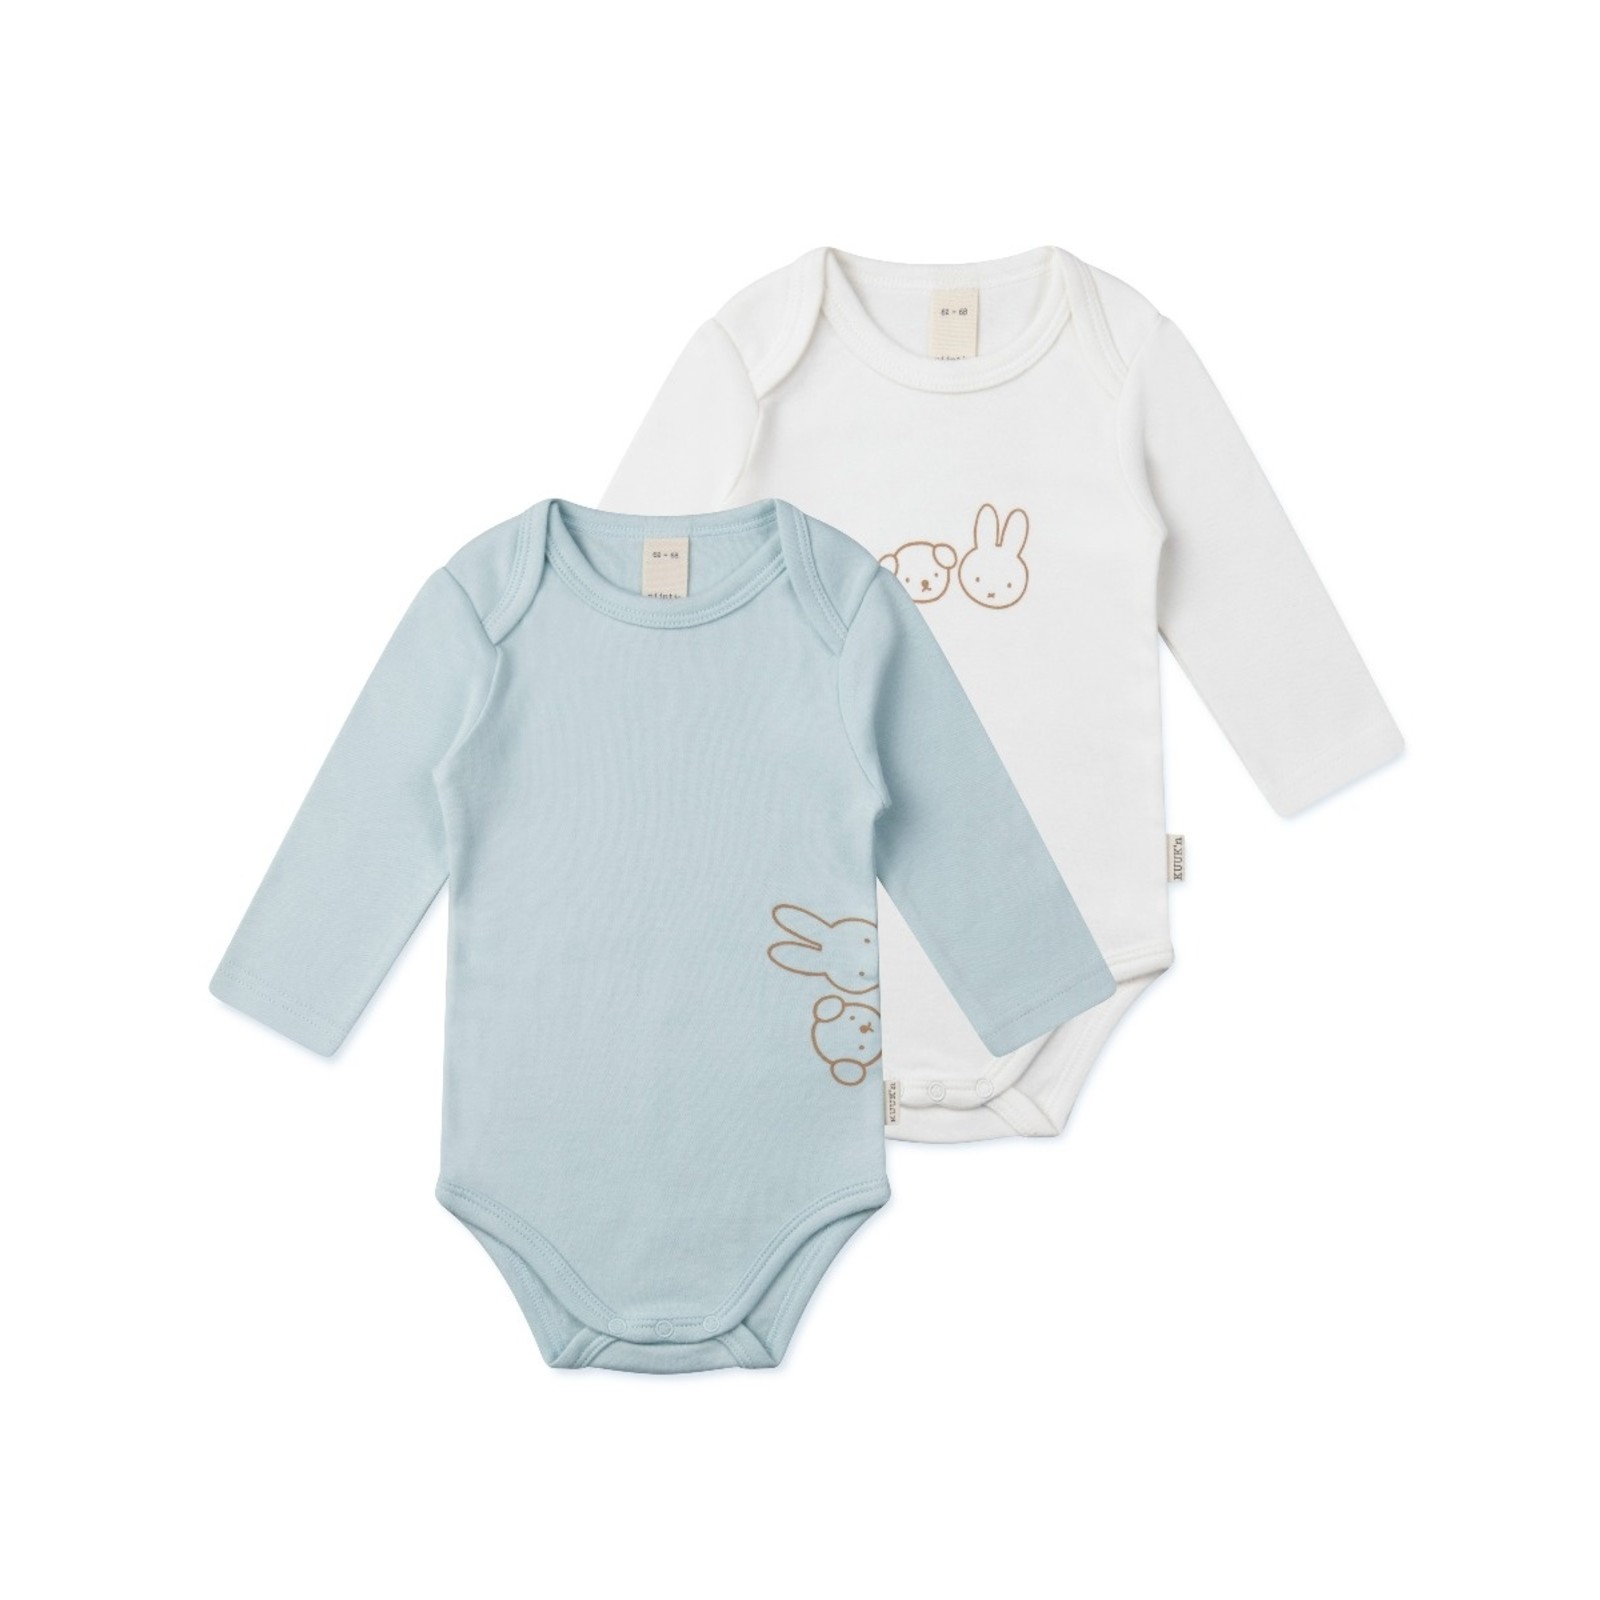 Unisex set of 2 long sleeve rompers size 50-56 (0-2 months)